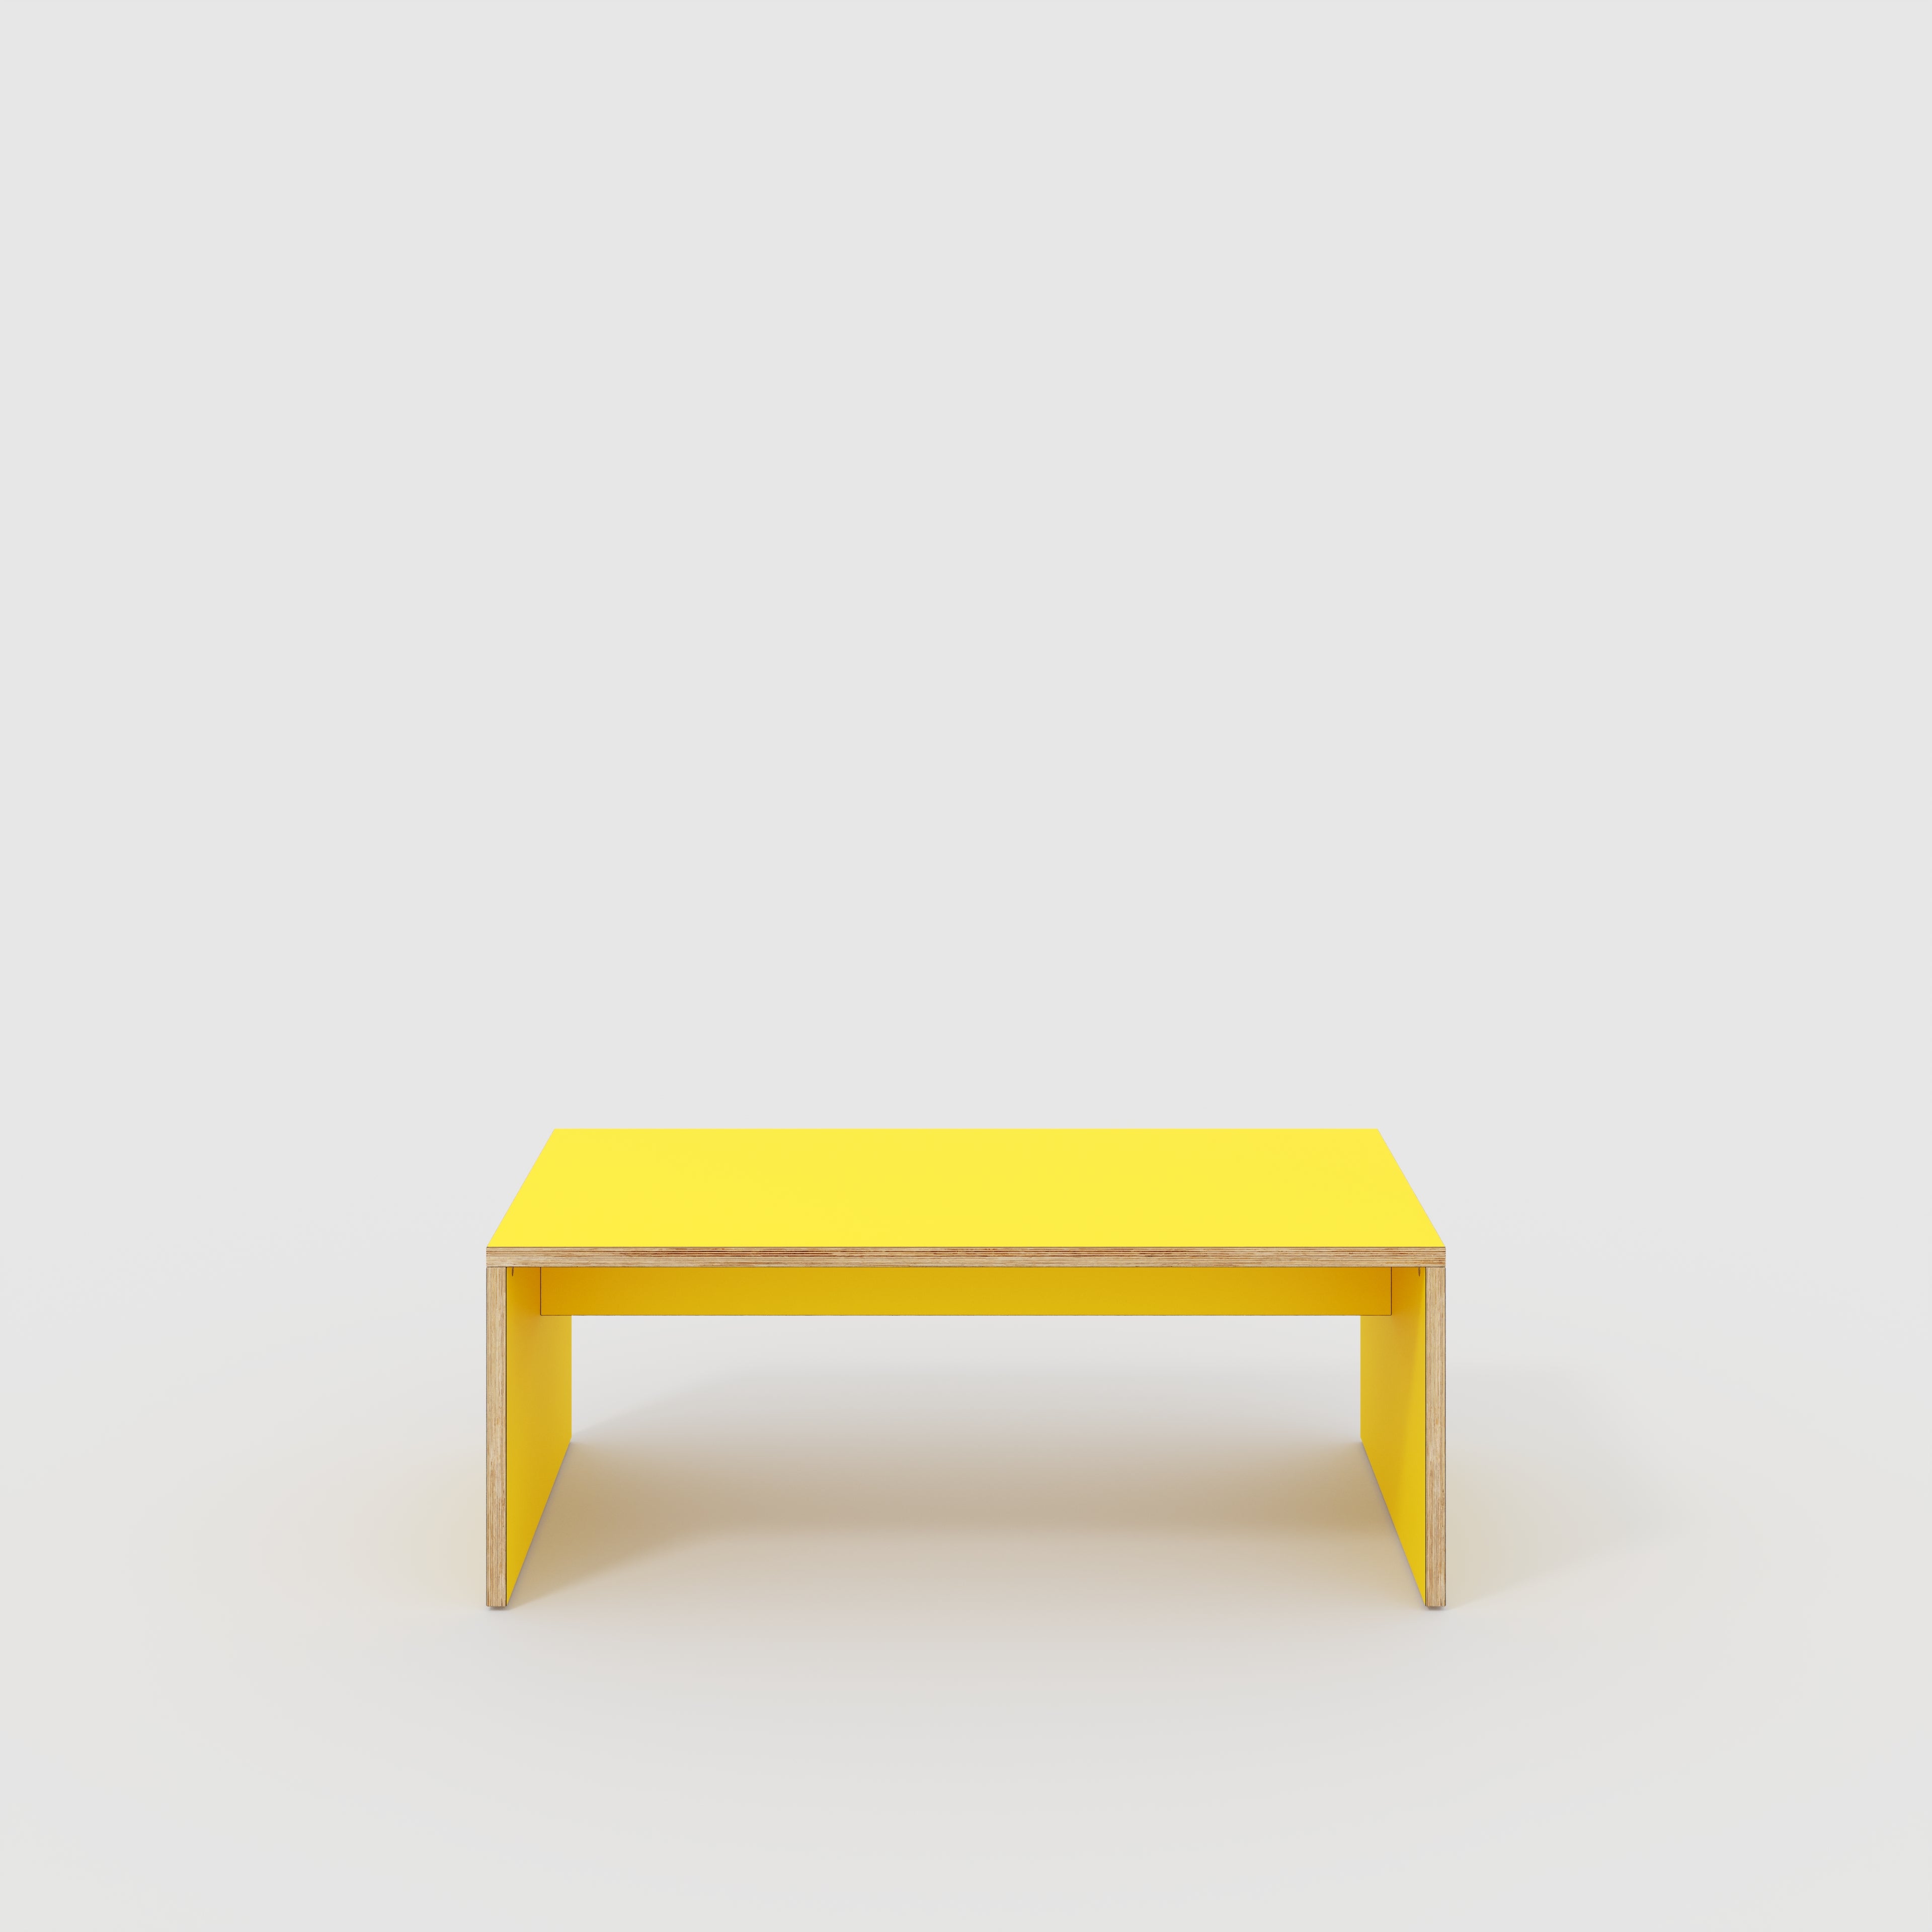 Coffee Table with Solid Sides - Formica Chrome Yellow - 1200(w) x 600(d) x 450(h)